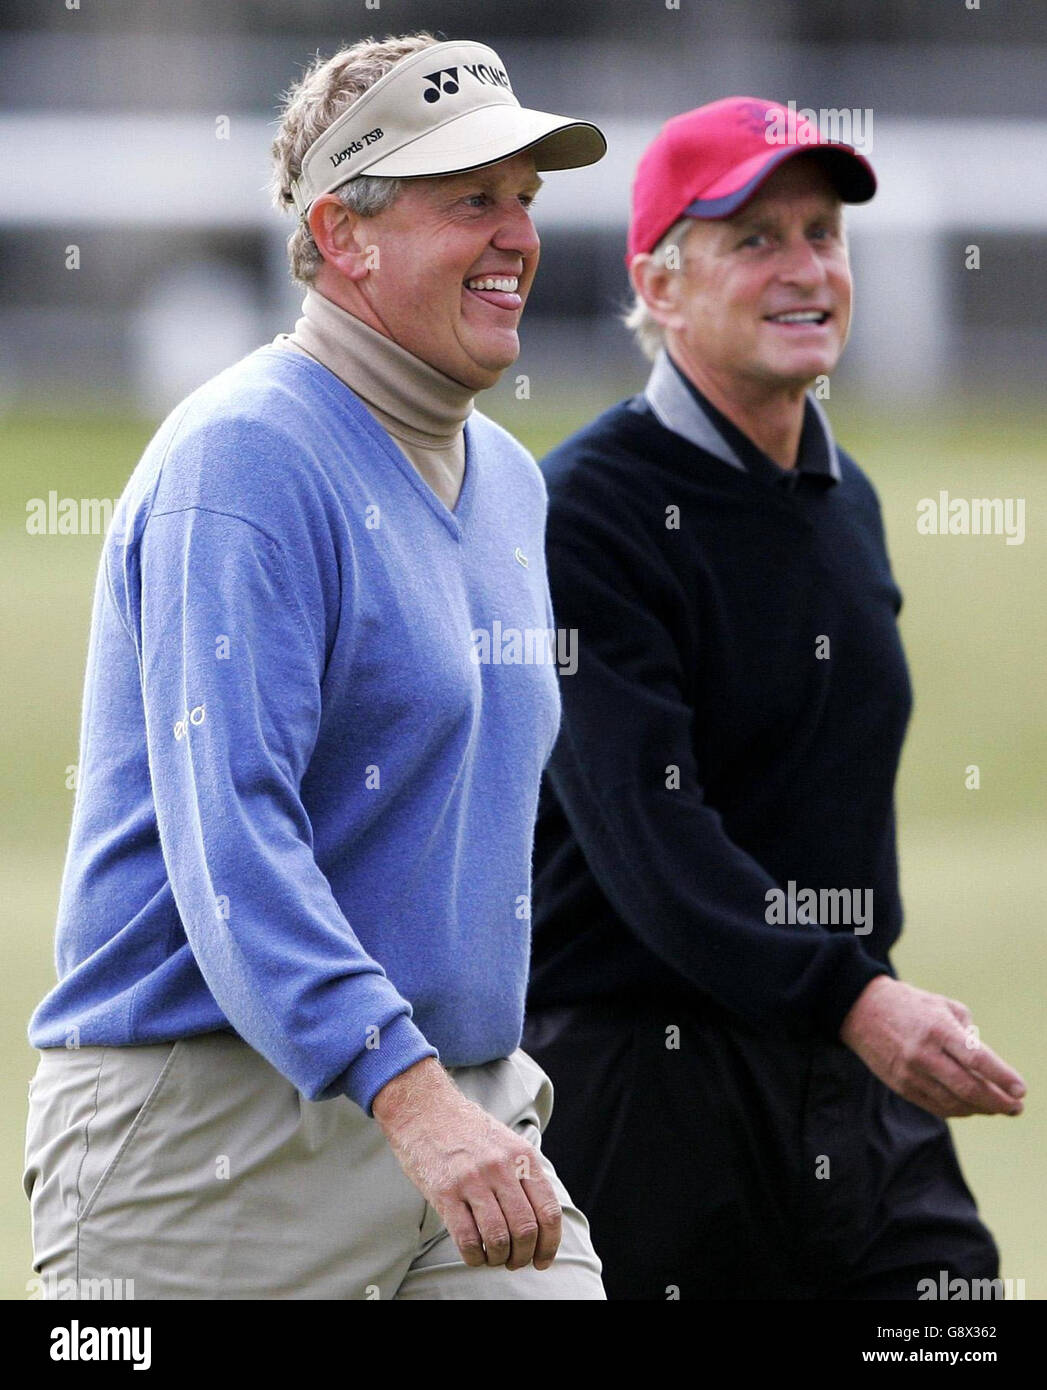 Colin Montgomerie (L) and Michael Douglas during the second round of the Dunhill Links Championships at St Andrews Golf Course, Fife, Scotland, Friday September 30, 2005. PRESS ASSOCIATION Photo. Photo credit should read: Andrew Milligan/PA. Stock Photo